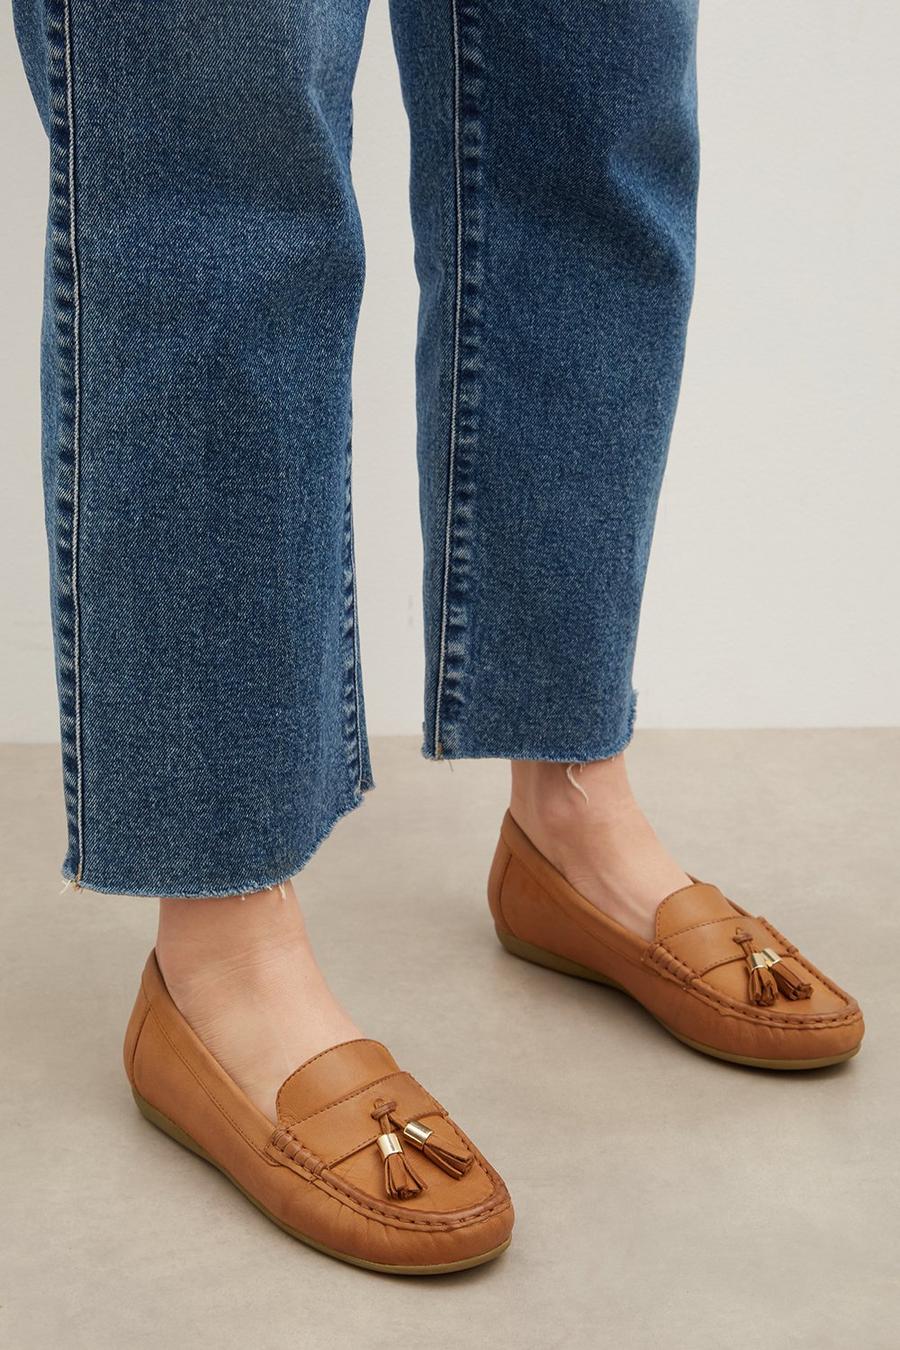 Good For The Sole: Lennox Comfort Leather Moccasin